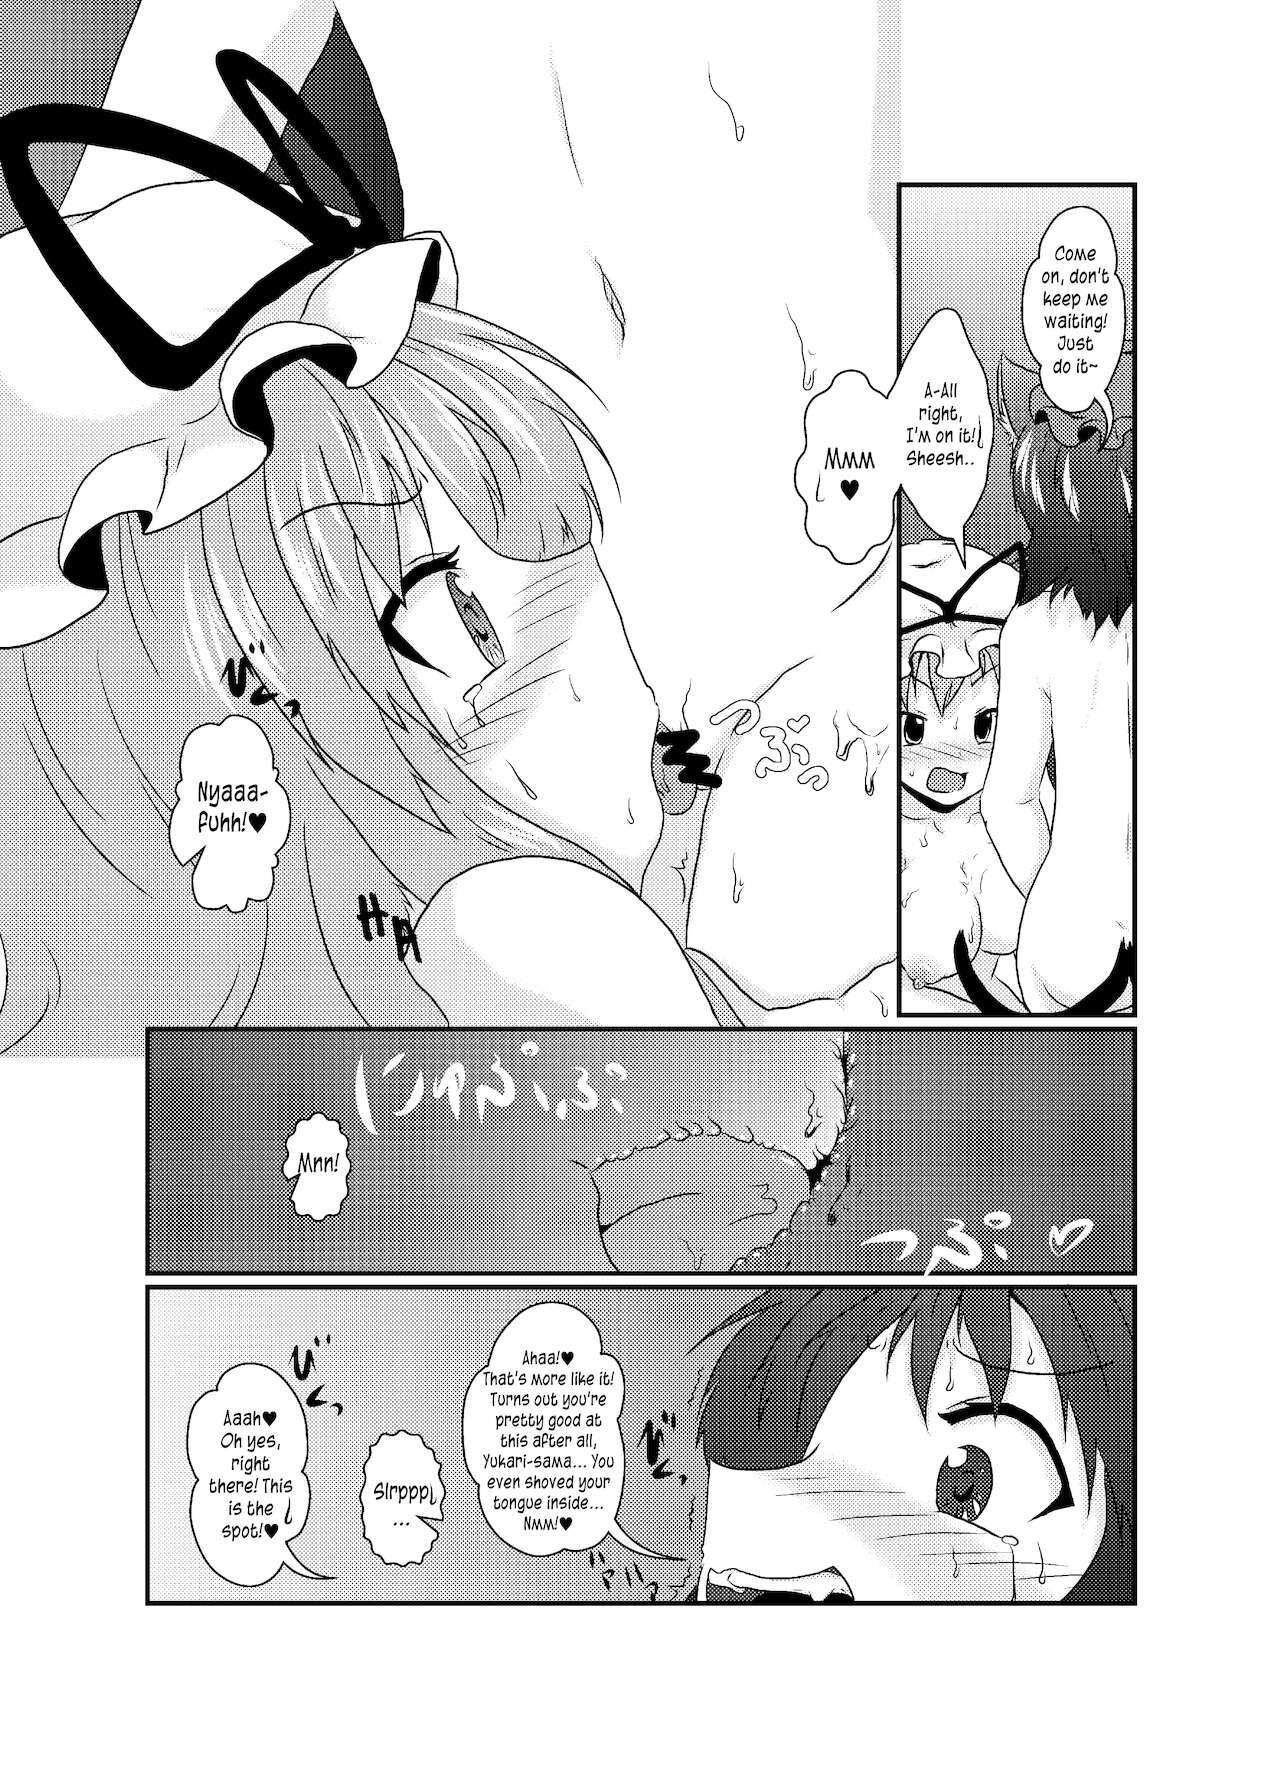 Hooker Chotto Tsukarechatta Mitai | I think I'm a little possessed! - Touhou project Adorable - Page 7